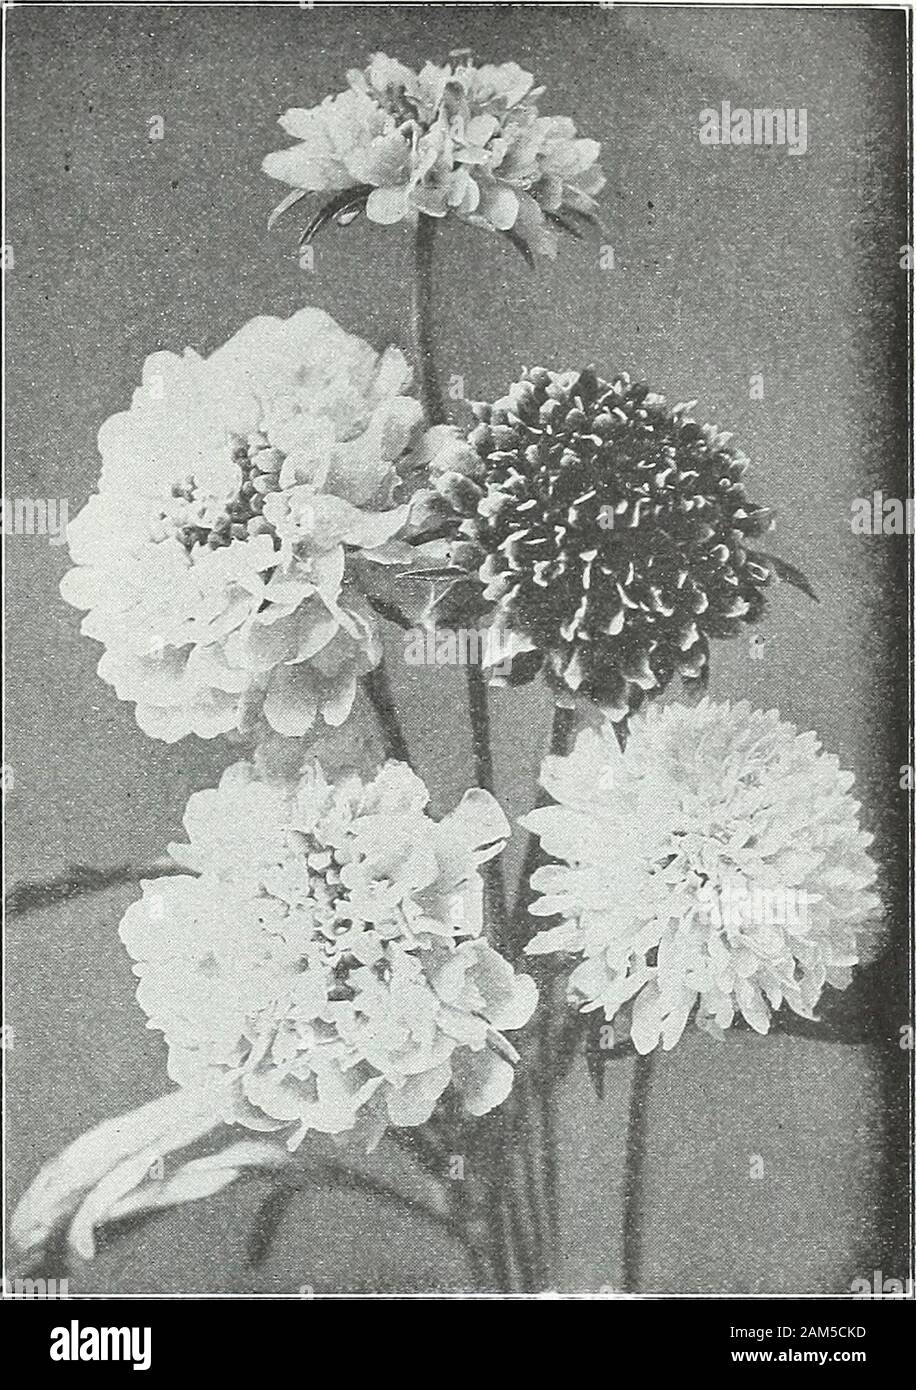 Farquhar's garden annual : 1922 . .10 ,10.10. Farquhars Perfection Scabious. SCHIZANTHUS. Butterfly Flower. Elegant free-flowering hardy annuals for the garden in Summer orfor the greenhouse during Winter. Ij ft. 3945 3946 3947 39483950 3955 39653967 3970 Farquhars Large-flowered Hybrids Mixed. The Schi-zanthus has become indispensable for cut flowers, and forpot culture in the greenhouse. This strain is unsurpassedfor size of flowers and variety of colors. It is the resultof many years of careful selection on the part of a leading pkt.speciahst in Europe. ... ... ^^ oz., $2.50; .50 Garraways Stock Photo